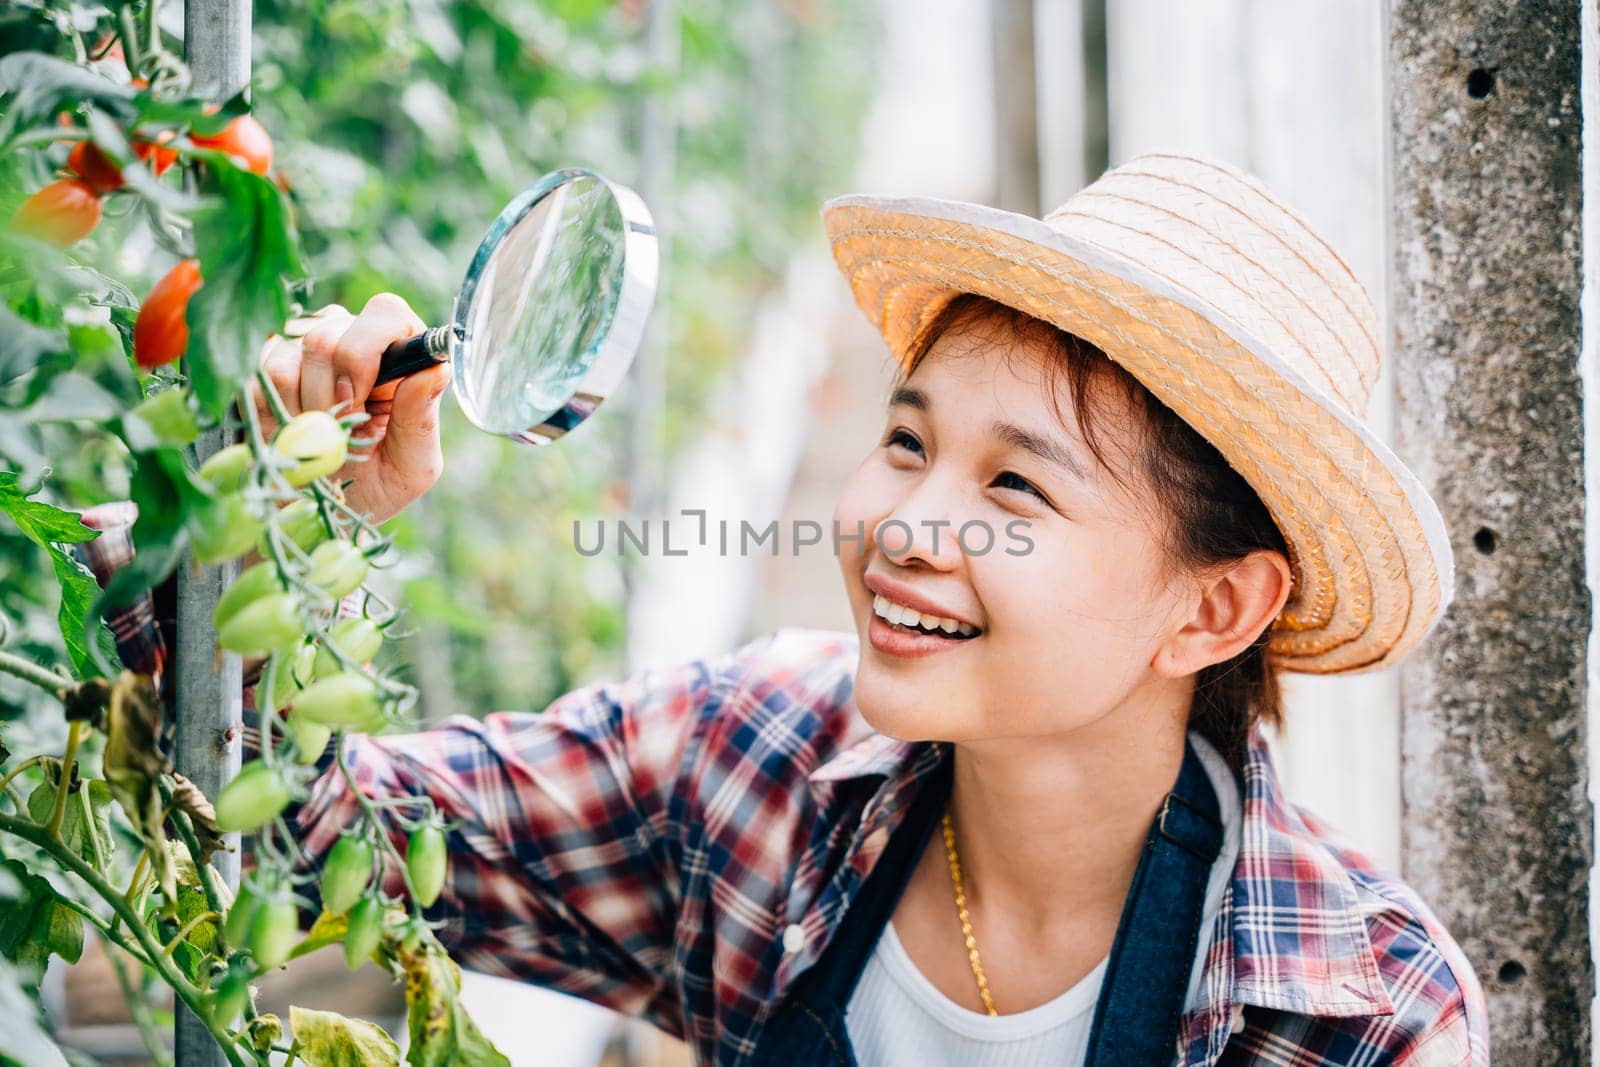 In a tomato greenhouse a young woman farmer uses a magnifying glass to closely examine vegetable tomatoes. Expertise and learning in farming science exploring growth and biology.